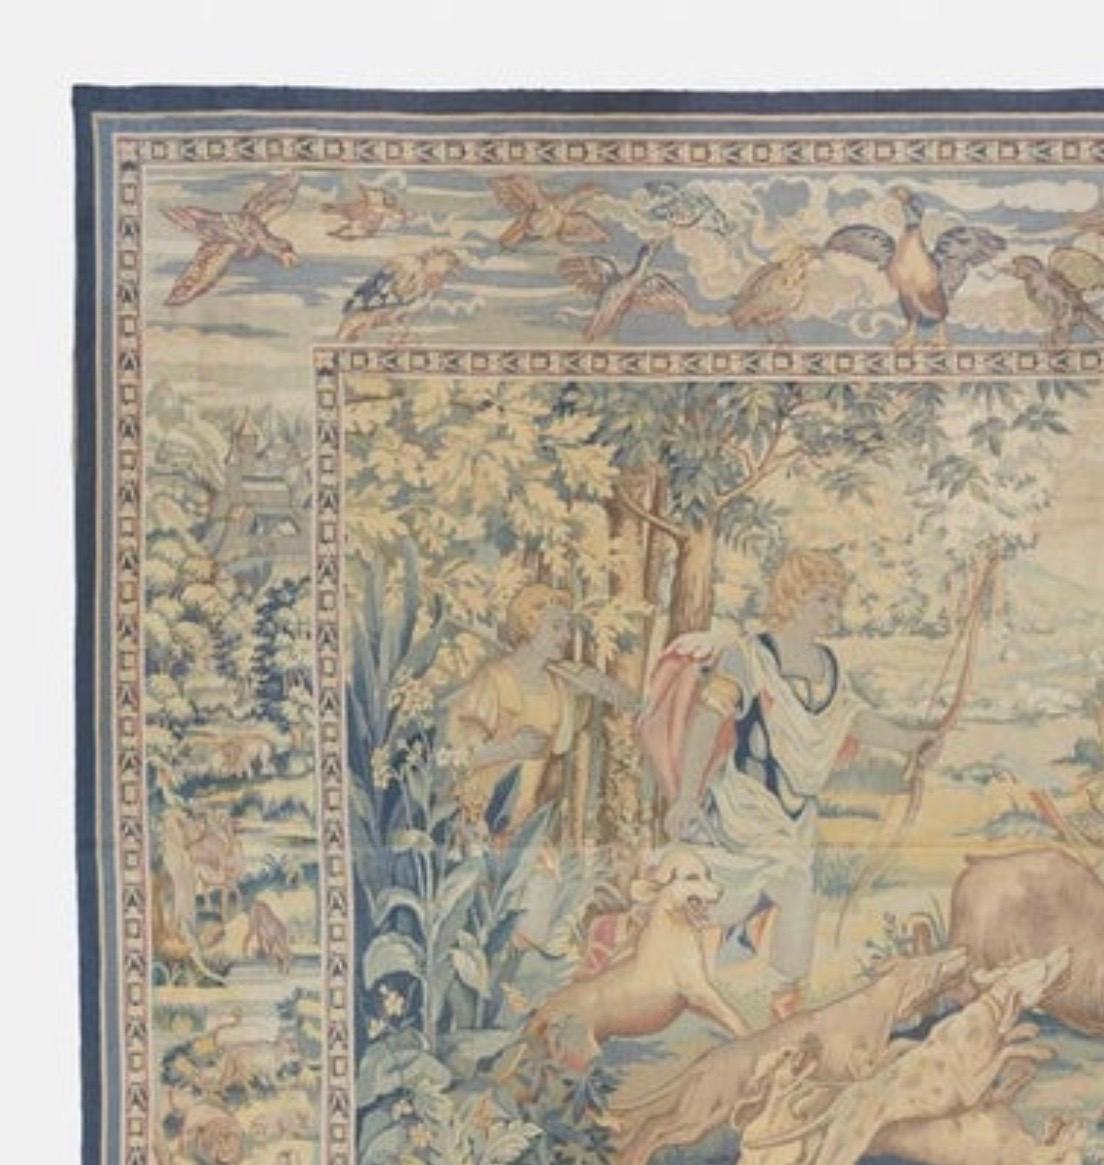 This is a lovely antique 19th Century Square French Aubusson Tapestry depicting a Hunting Scene on a beautiful summer day in the countryside with lush trees and vegetation. We see that an antelope has been struck with an arrow and the dogs have